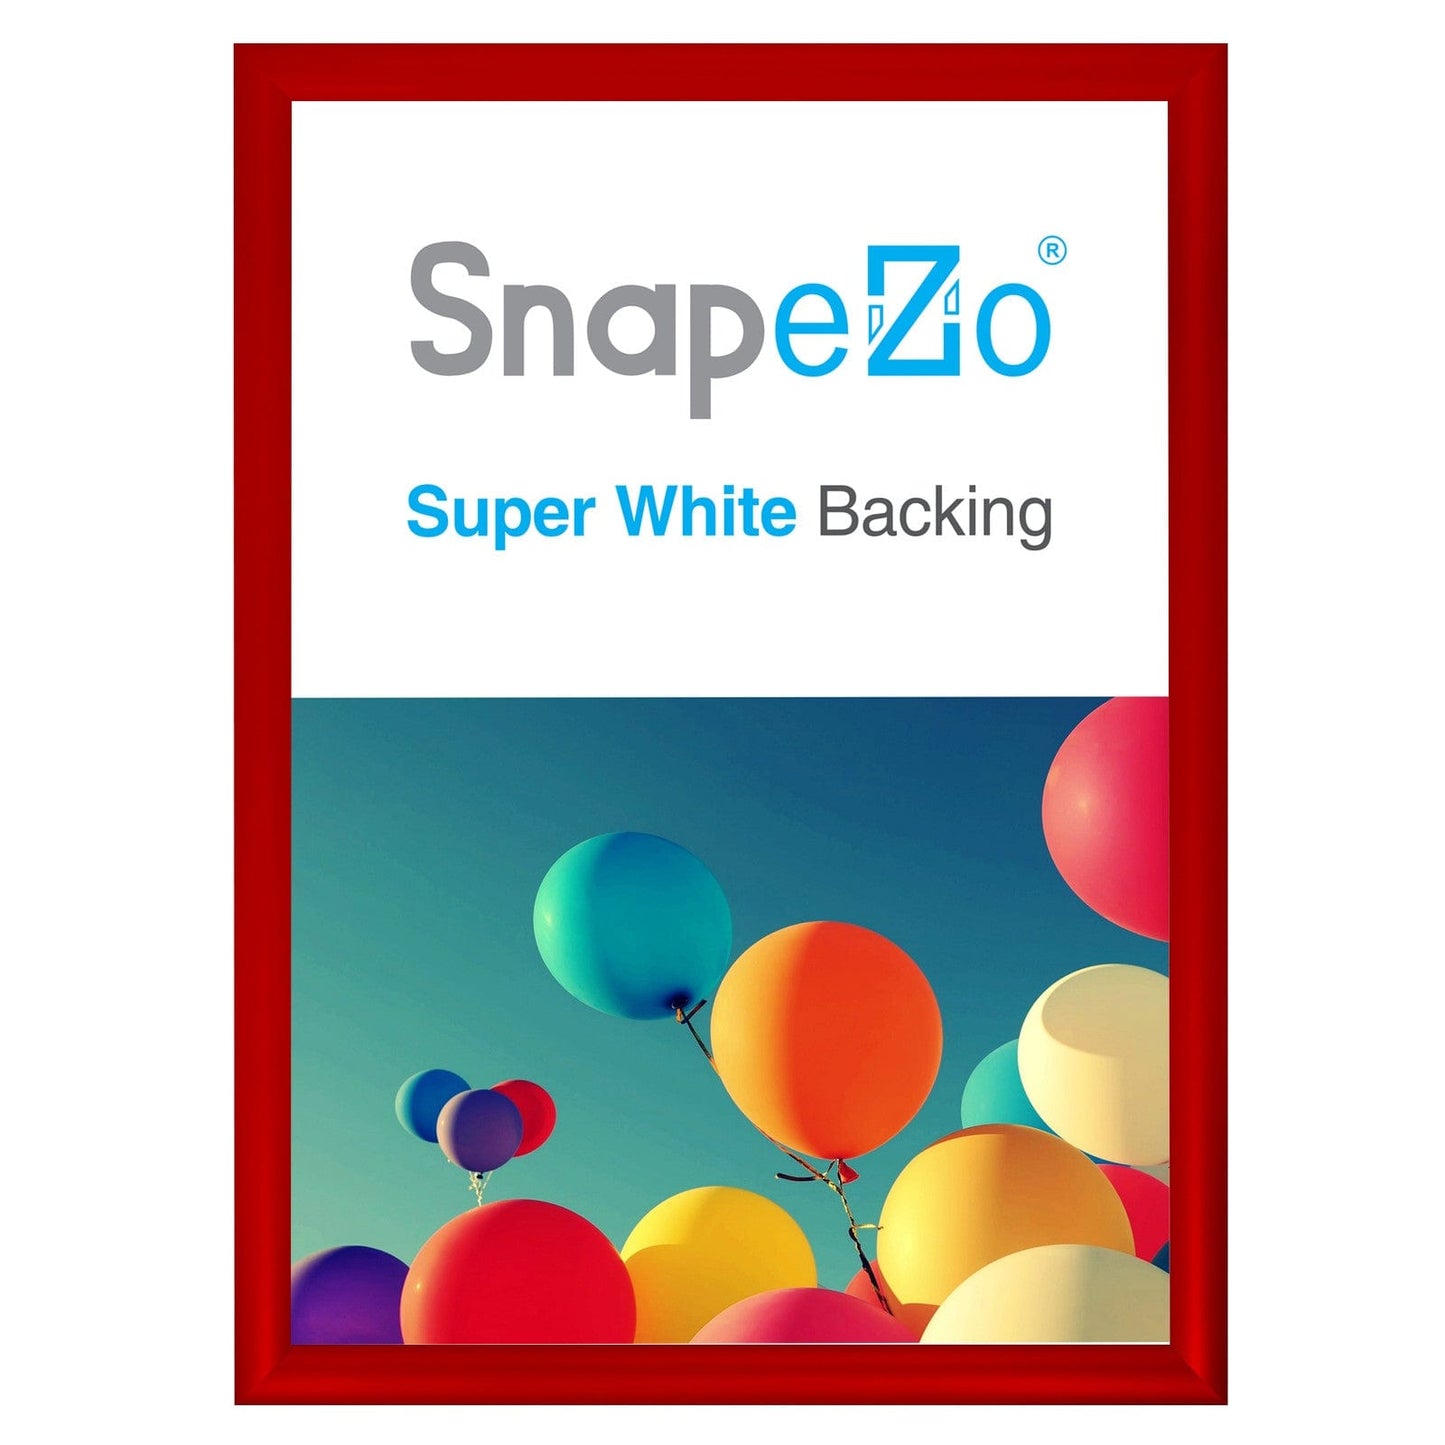 14x20 Red SnapeZo® Snap Frame - 1.2" Profile - Snap Frames Direct